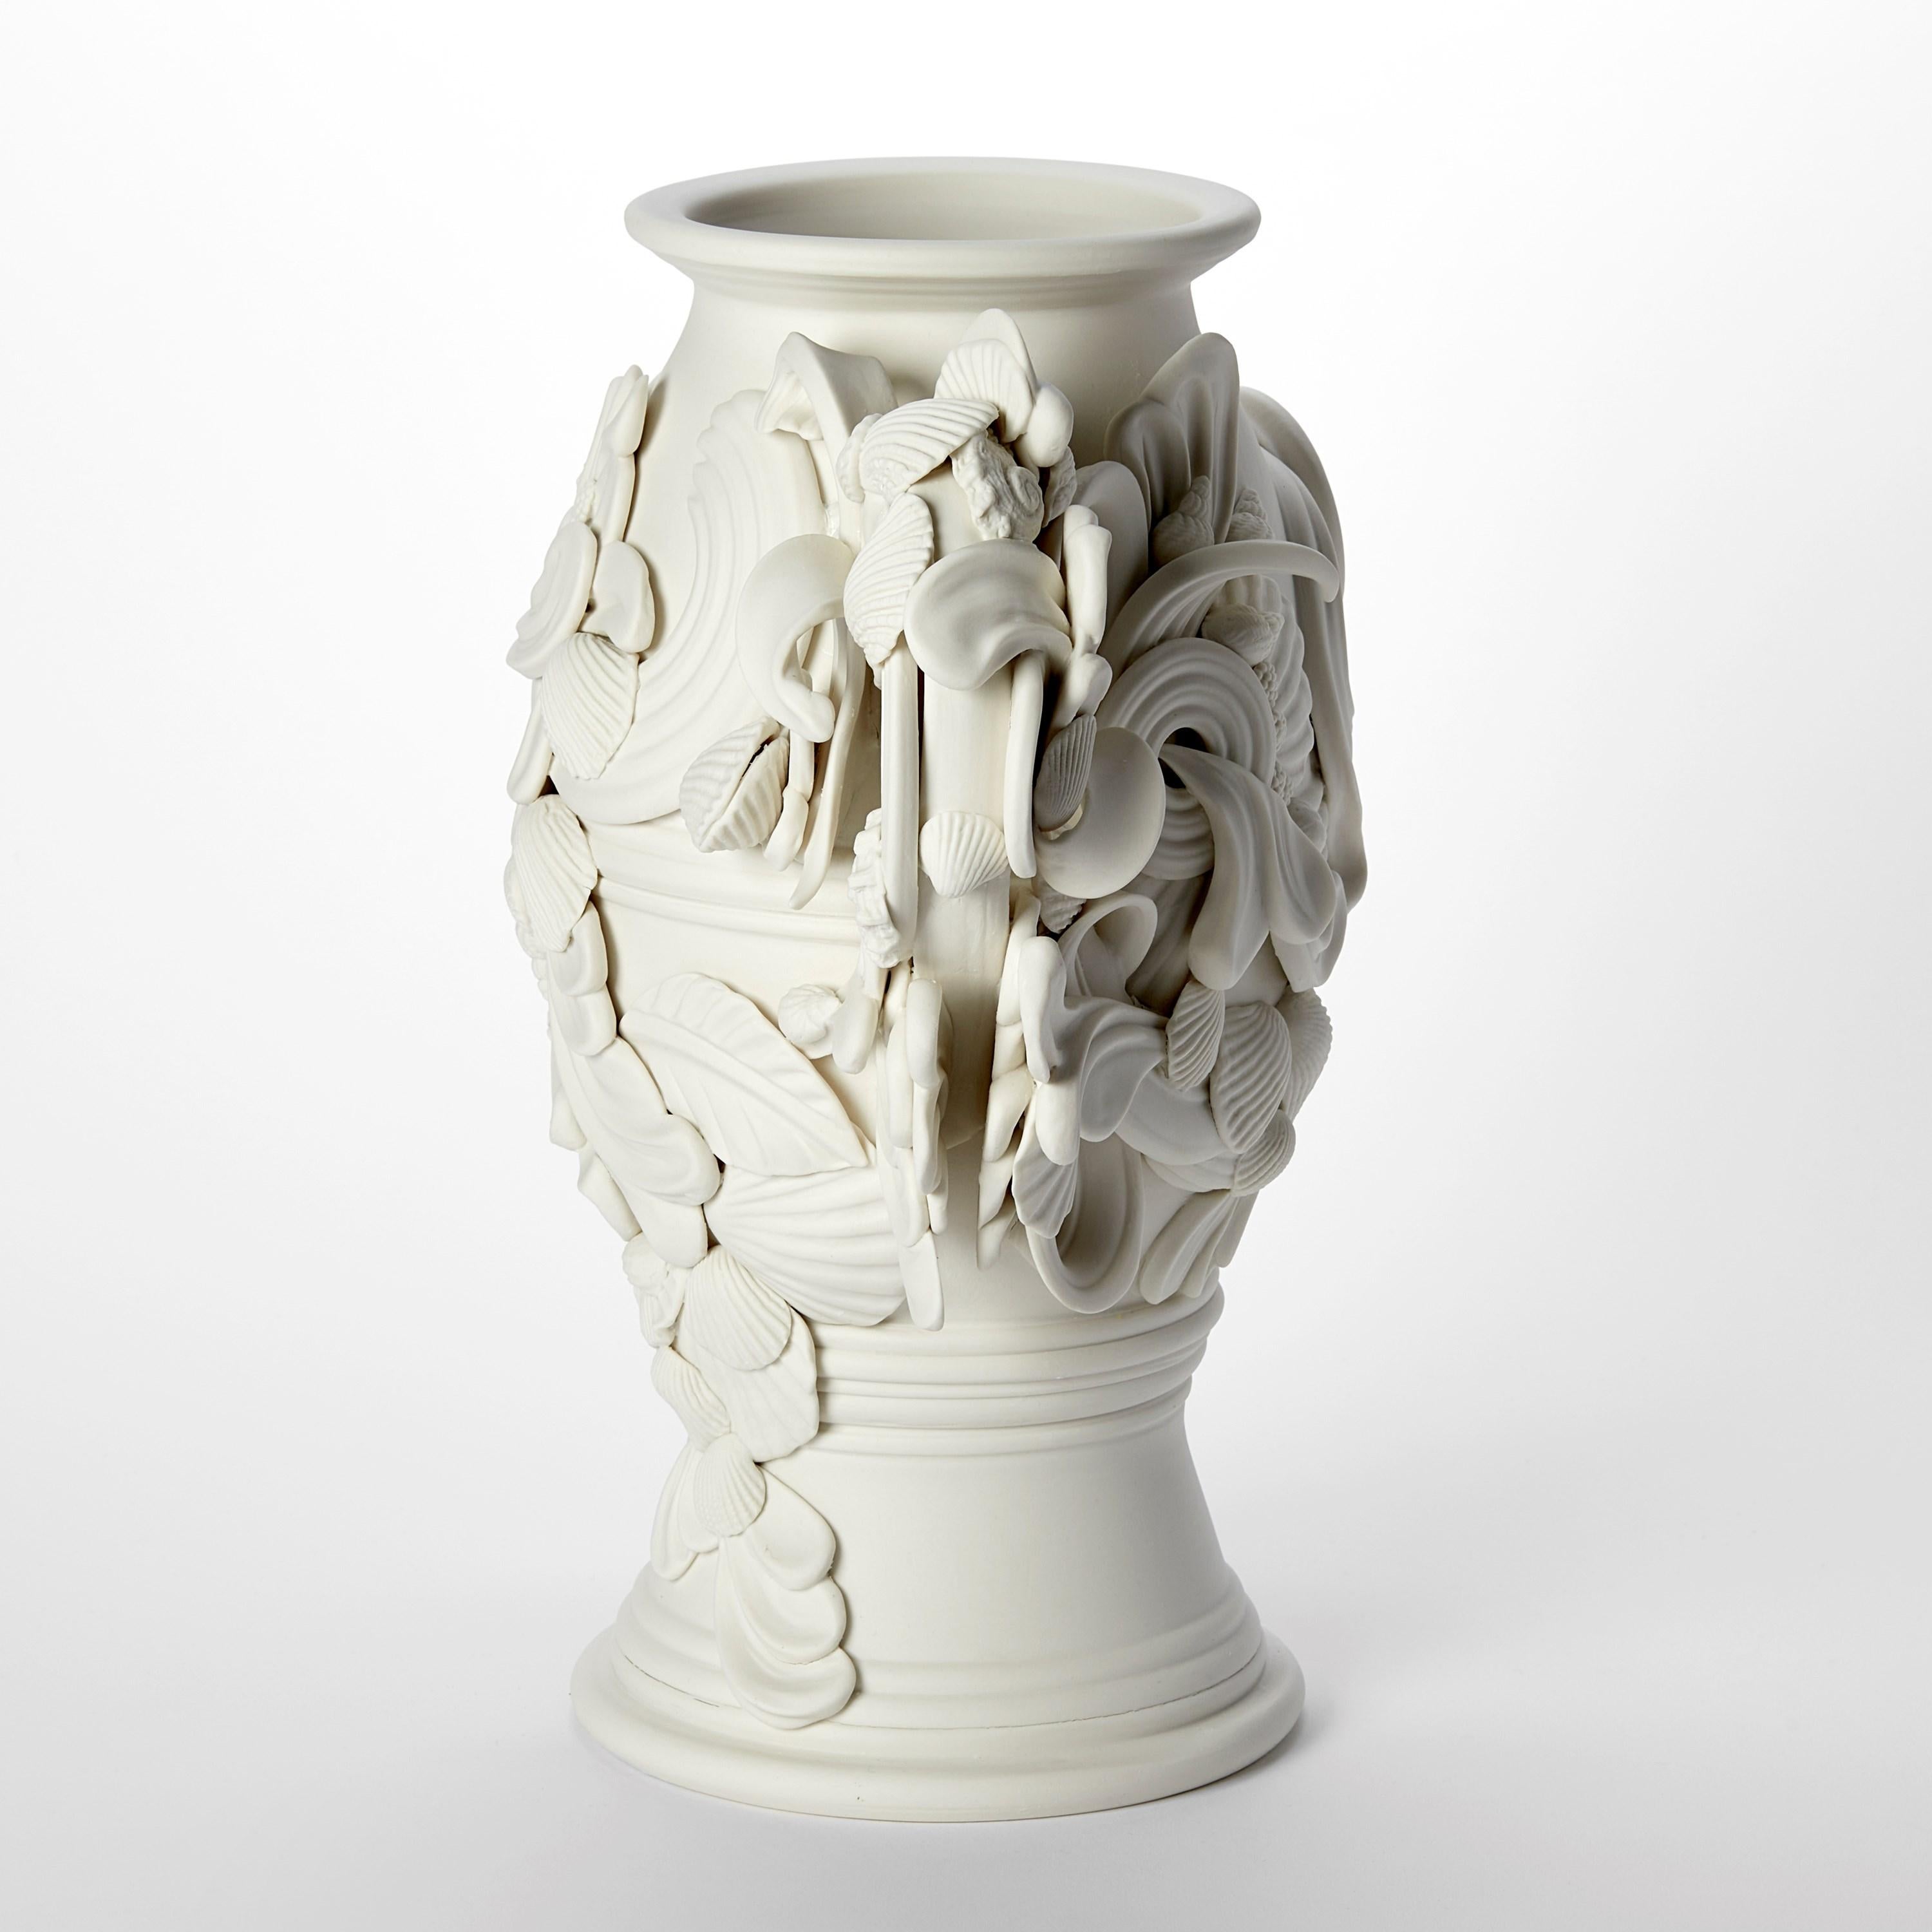 Hand-Crafted Rocaille IV, rococo inspired porcelain vessel with swirls & shells by Jo Taylor